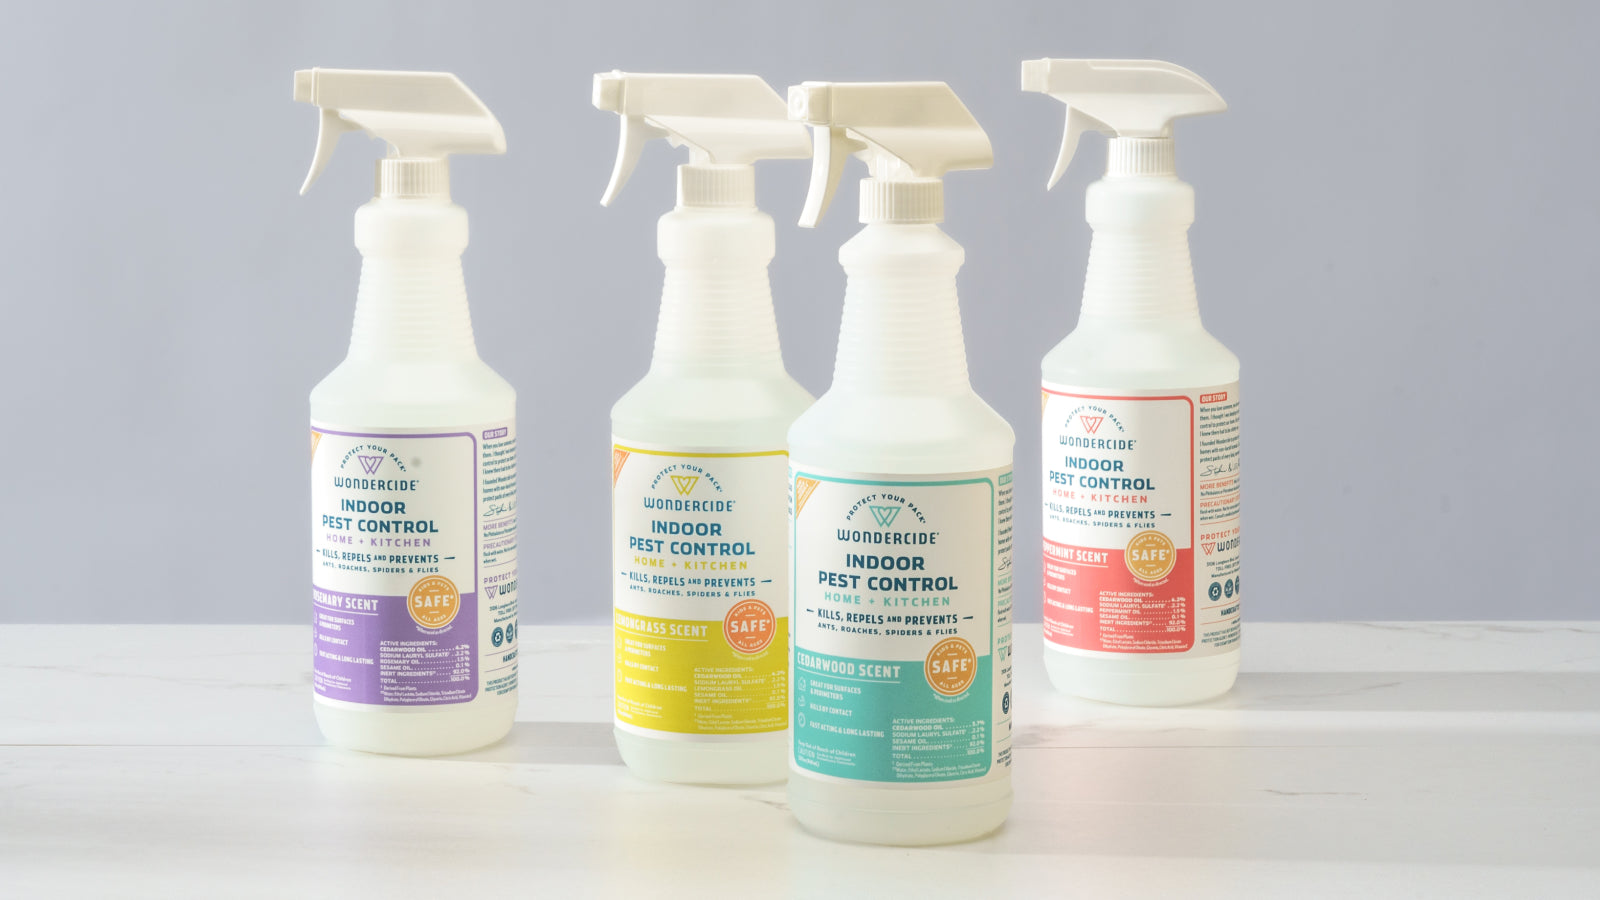 Wondercide Indoor Pest Control Srpays in Four Scents